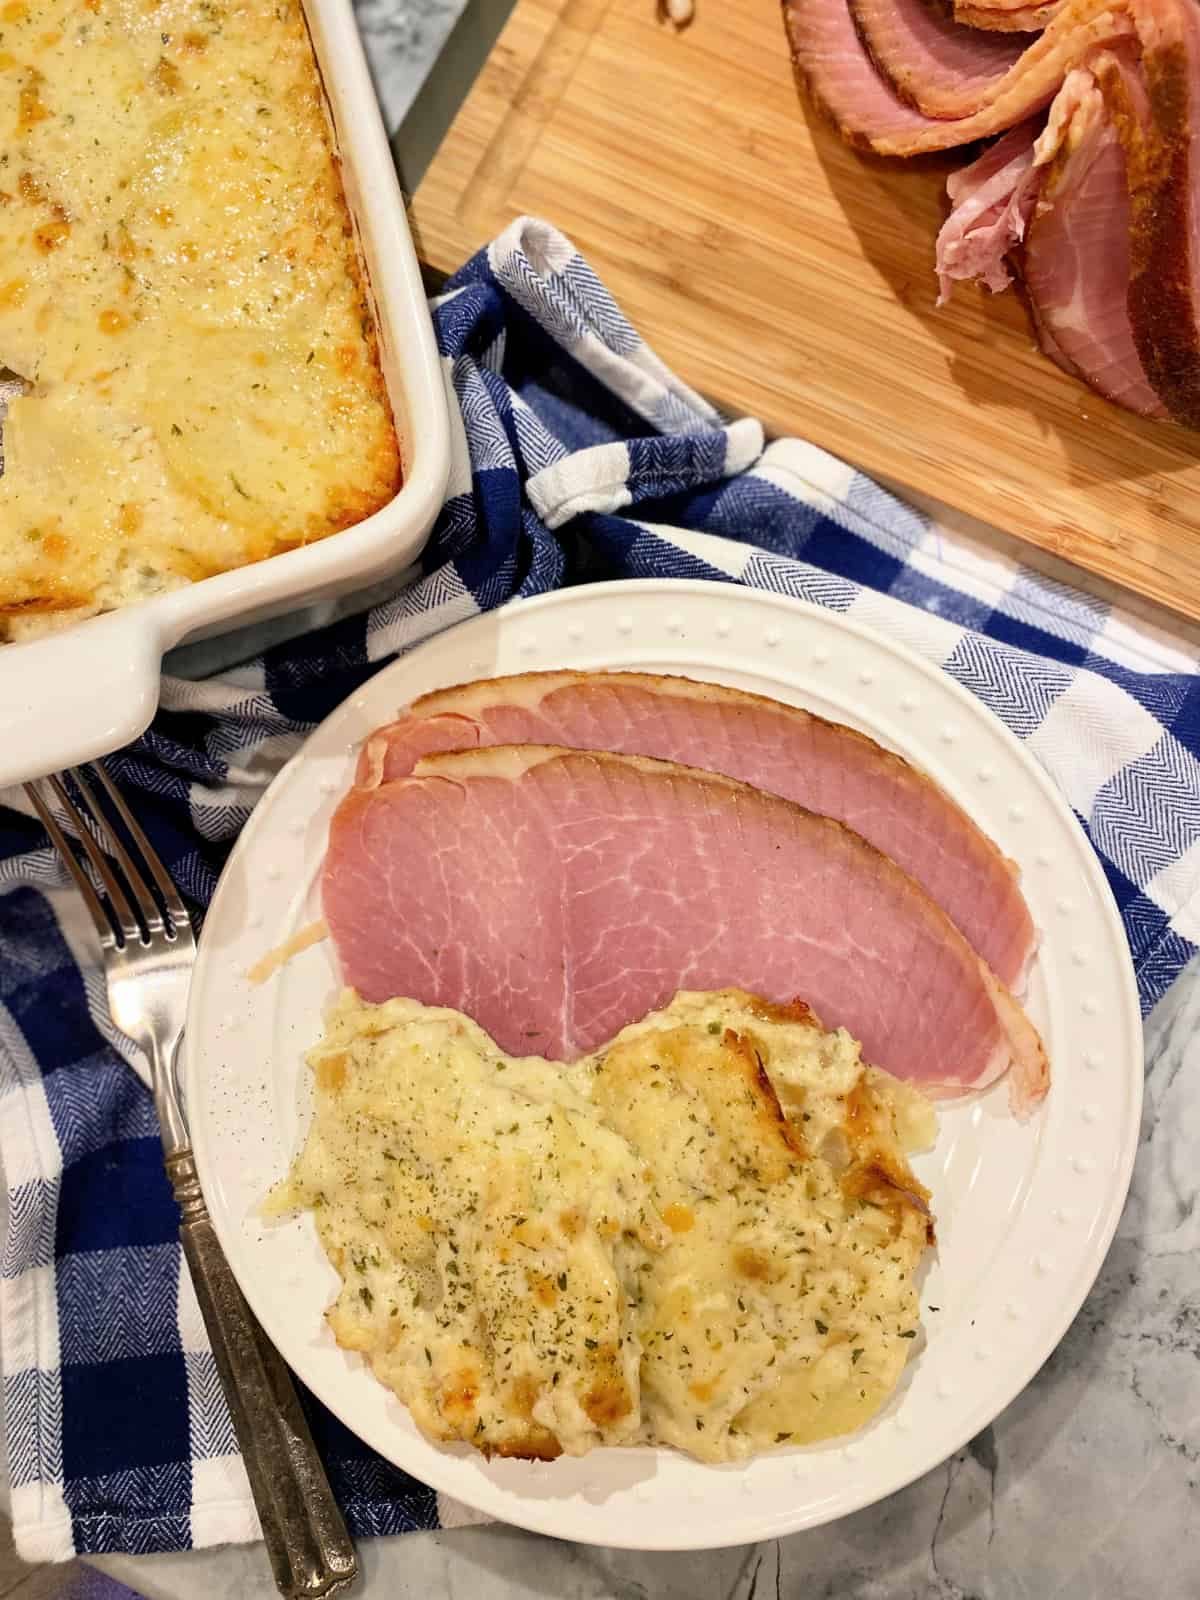 Cheesy Scalloped Potatoes with sliced ham on a white dish sitting on top of a plaid blue and white kitchen towel.